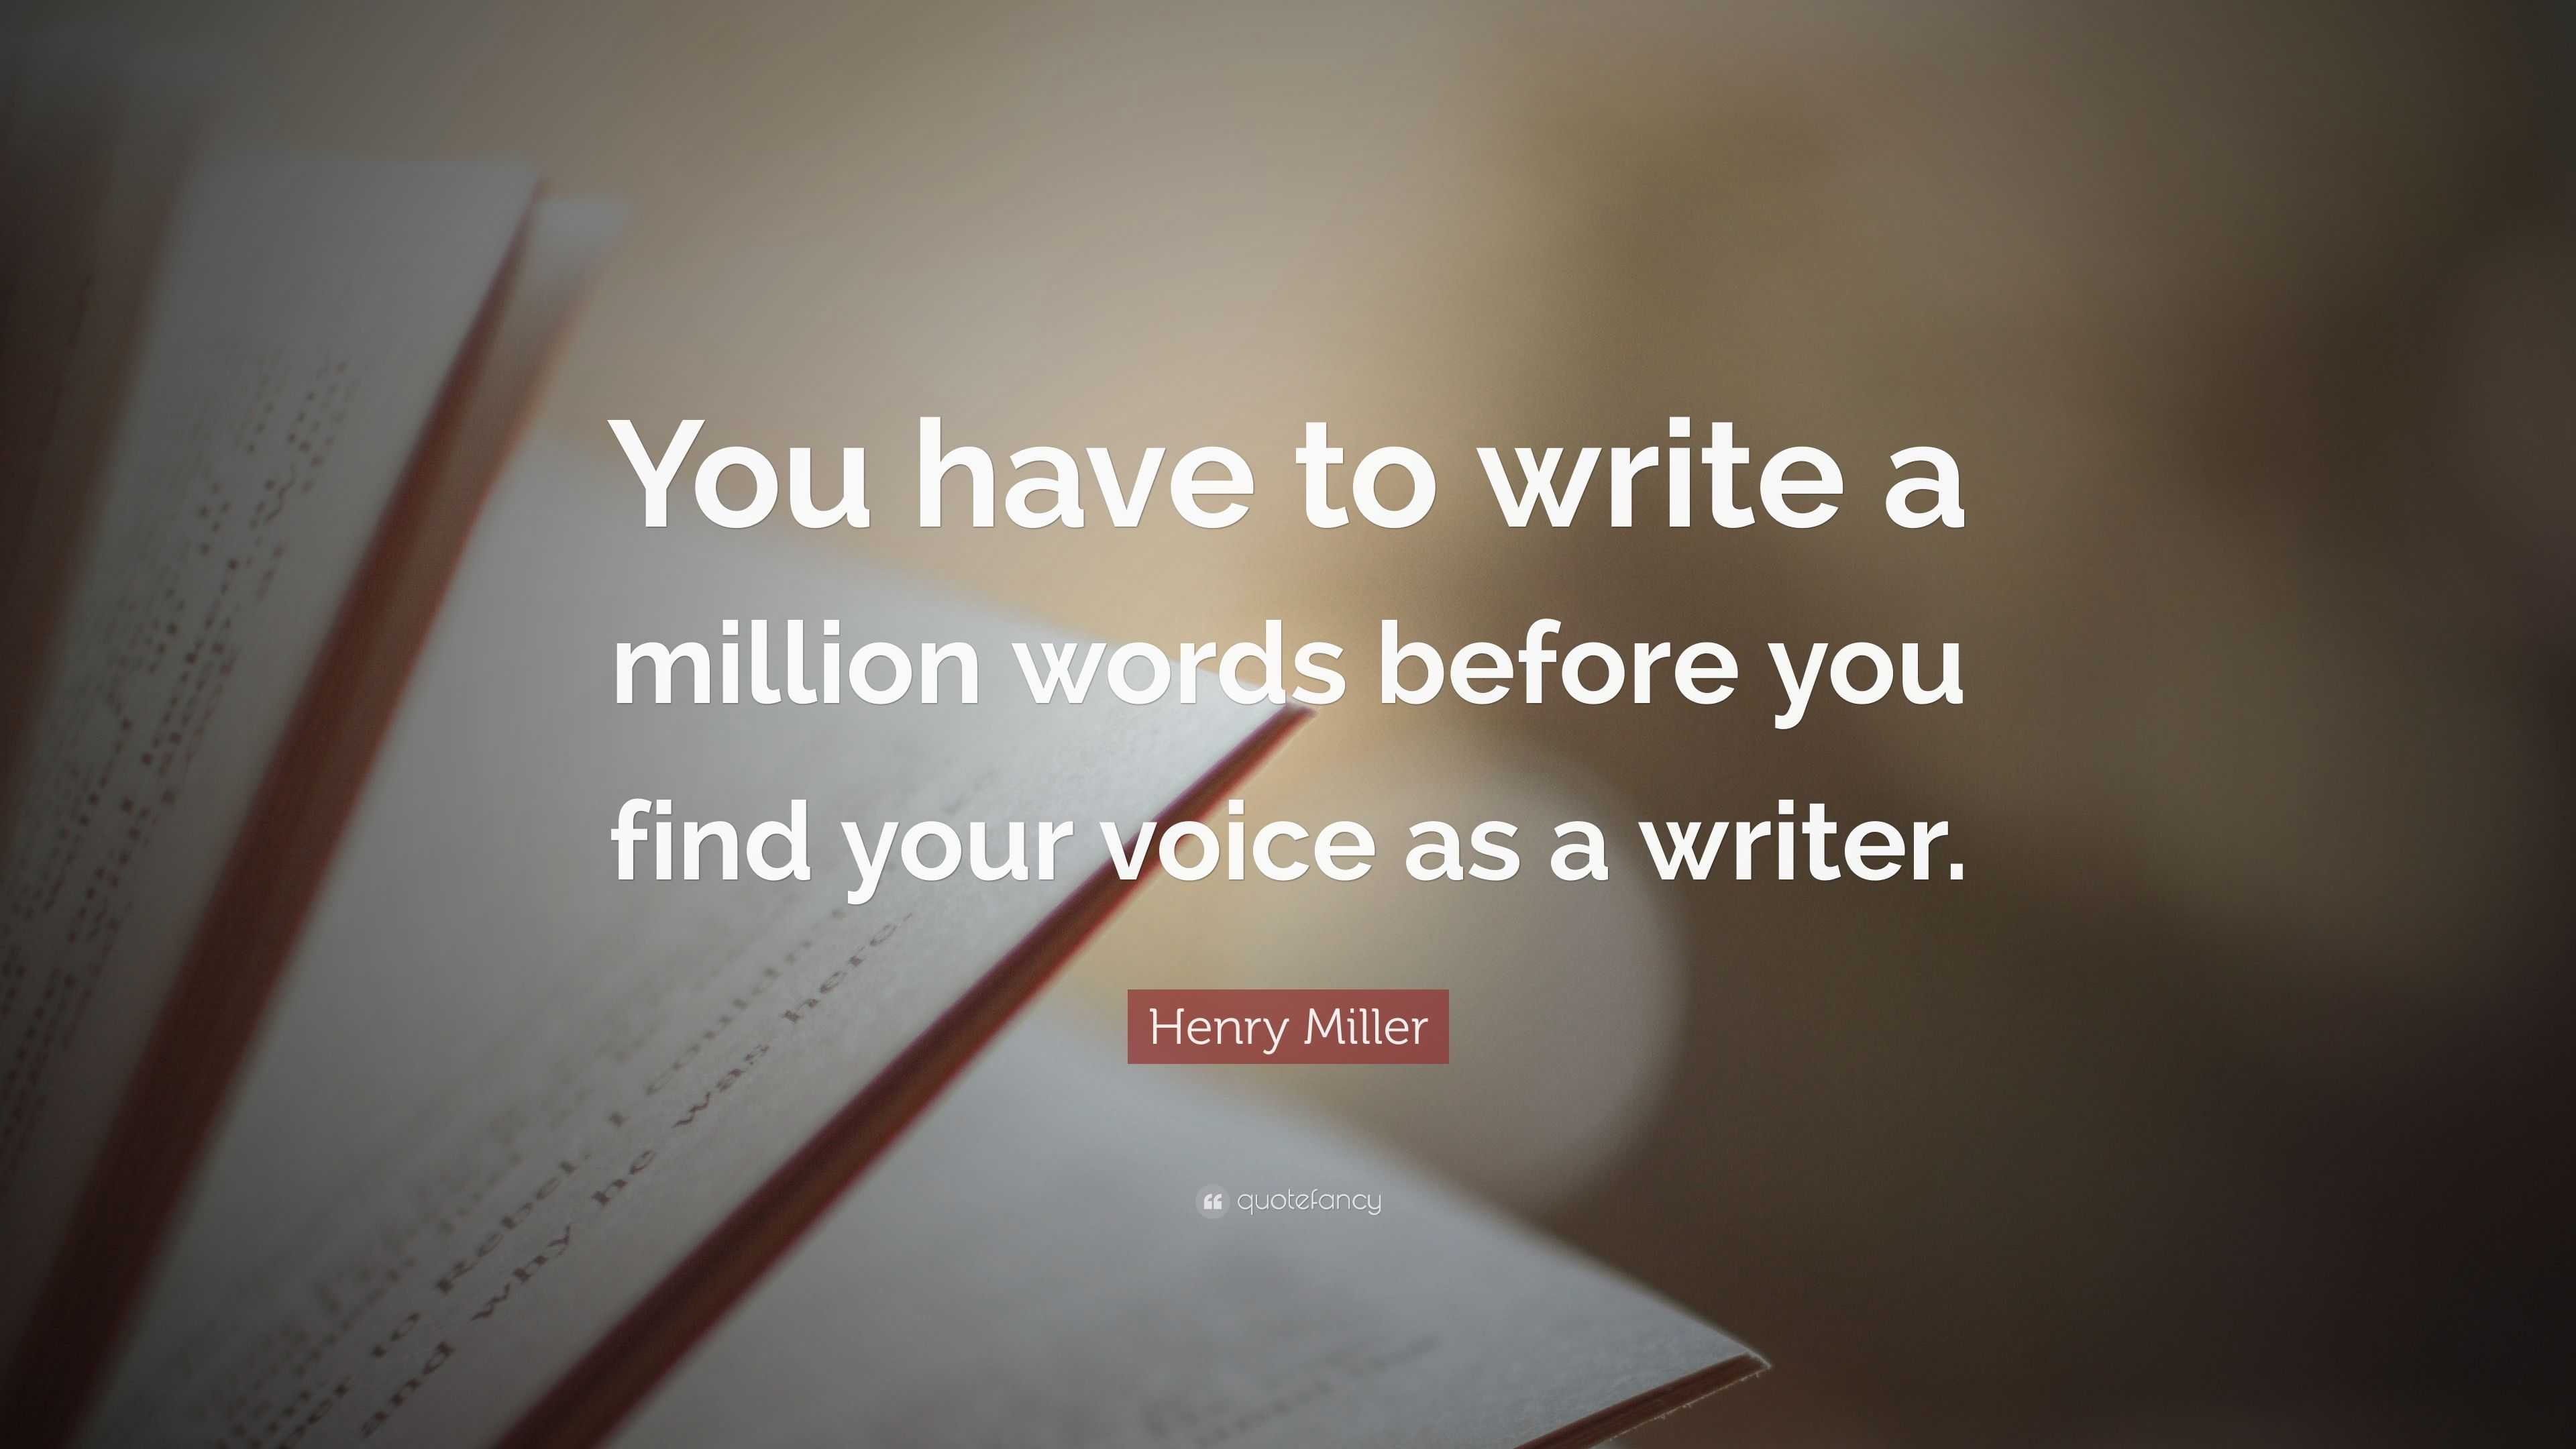 Henry Miller Quote: “You have to write a million words before you find